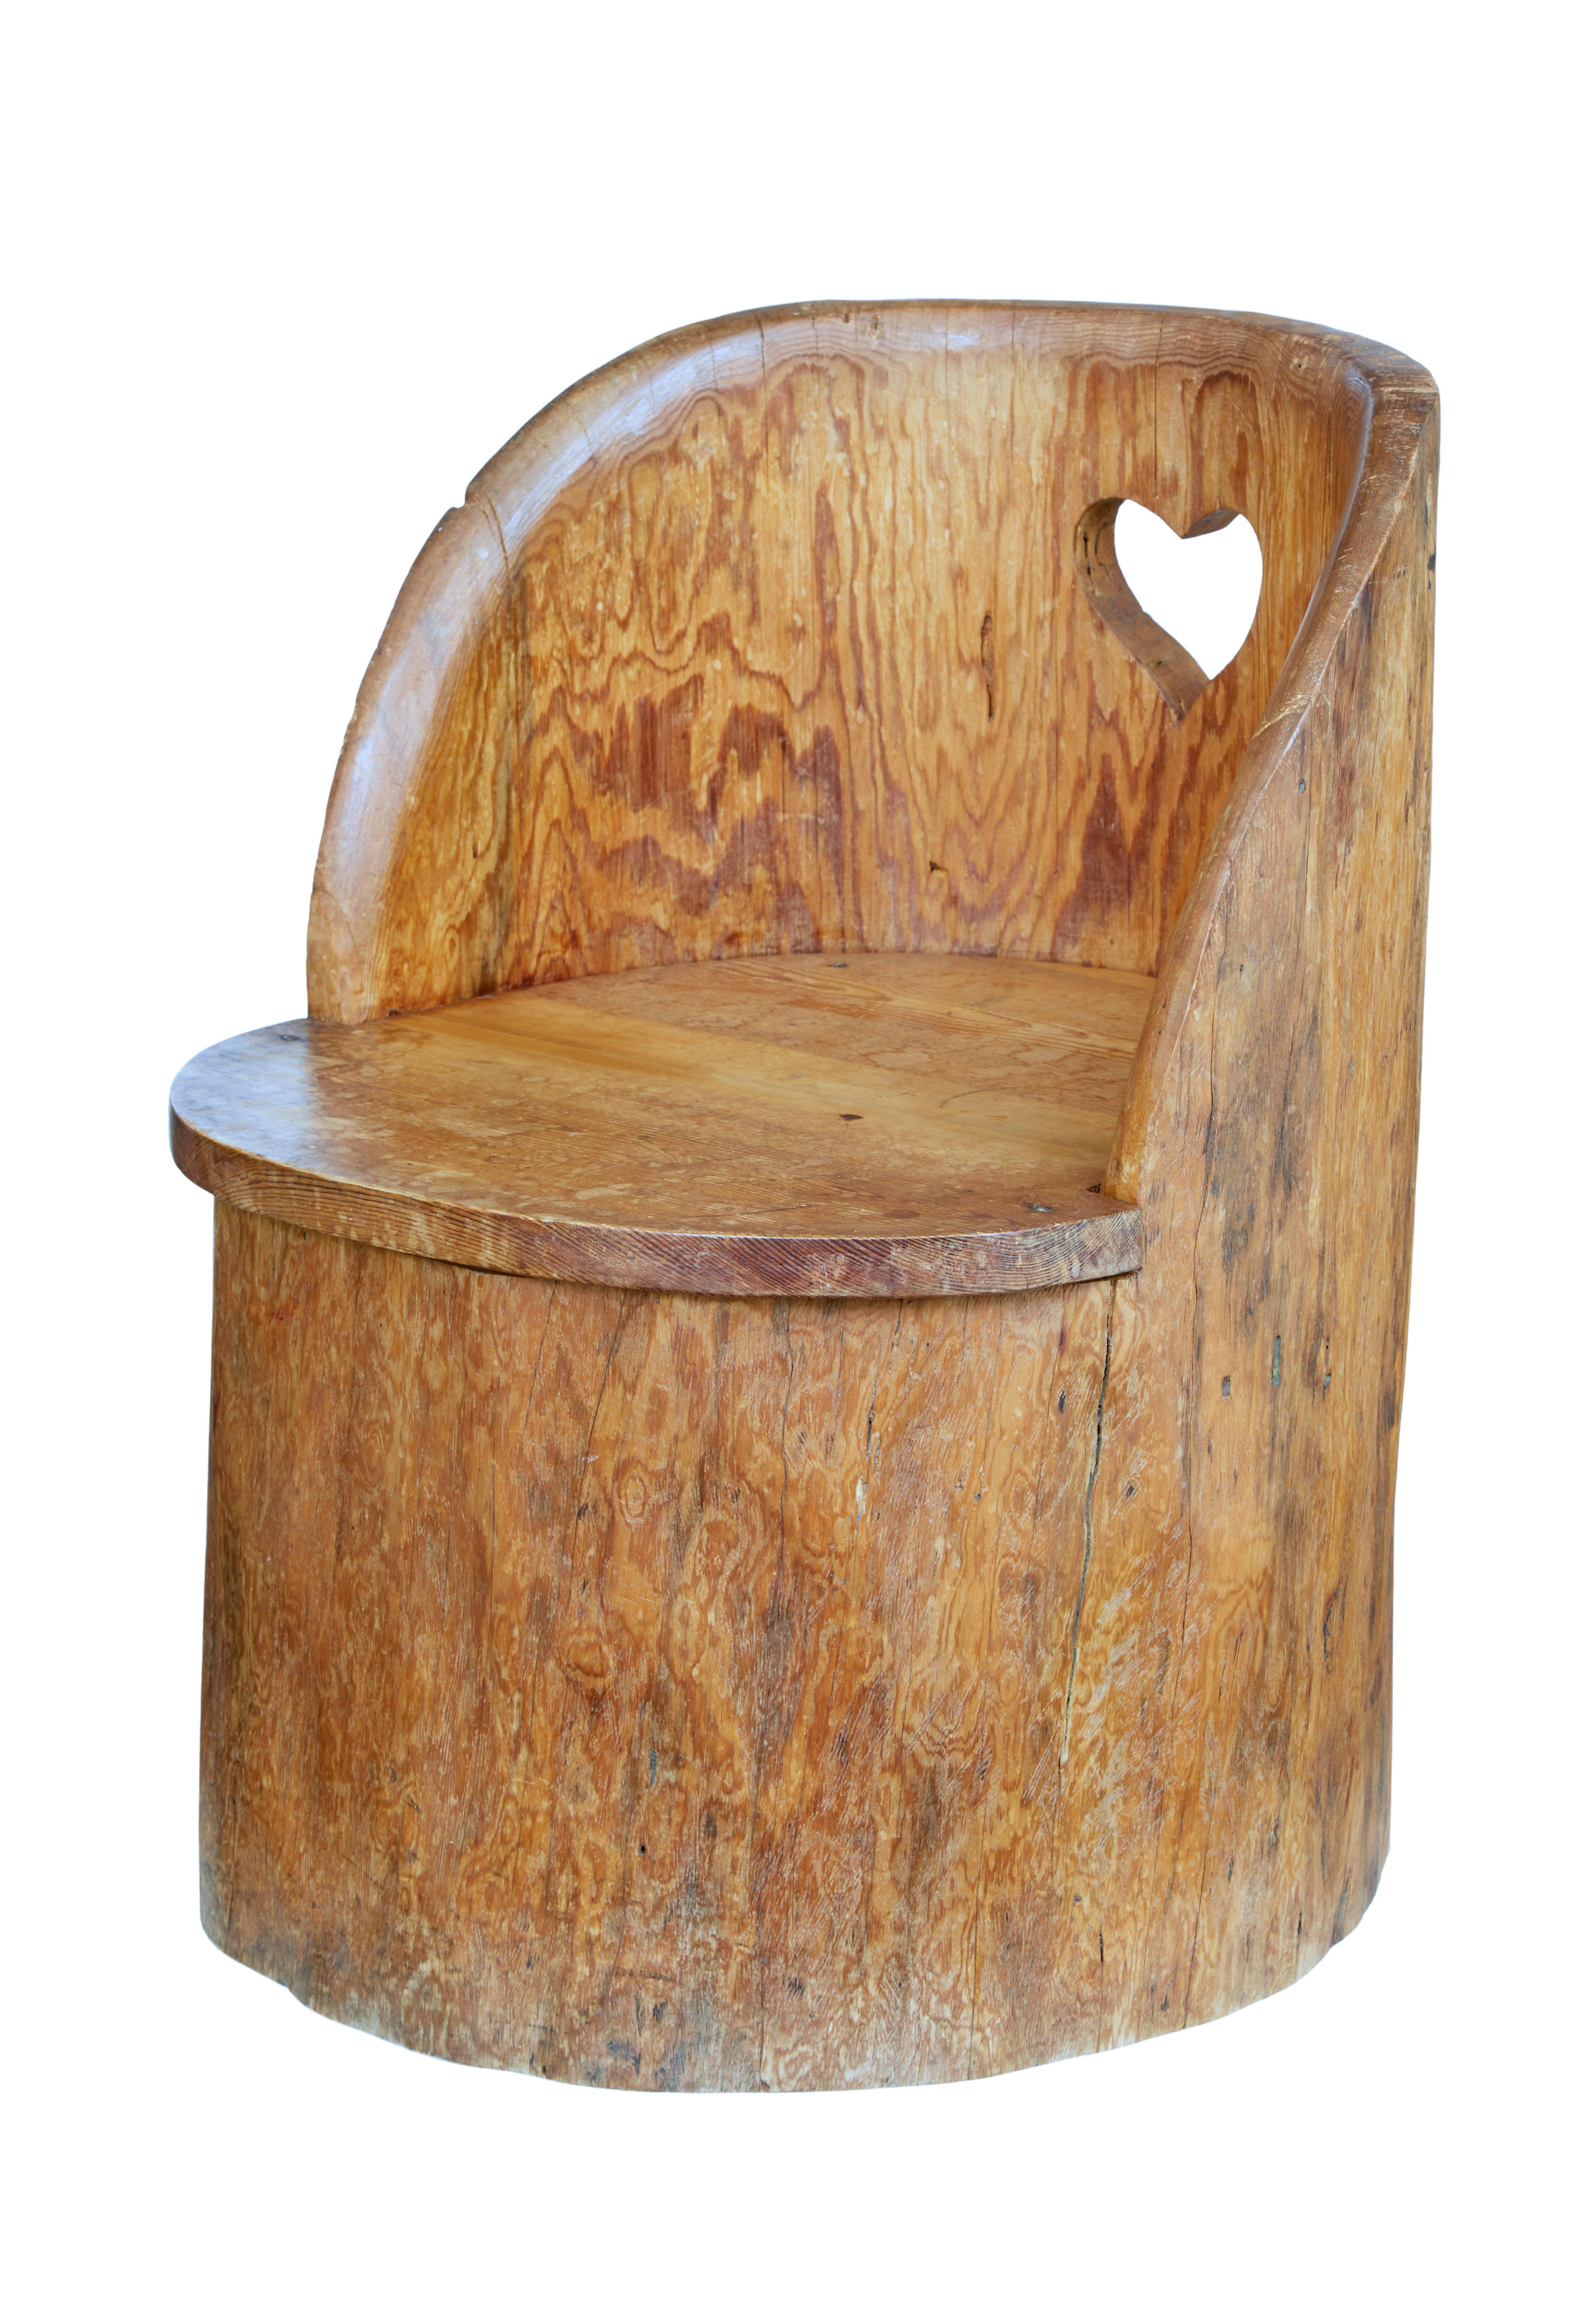 Hand-Carved 19th Century Large Dugout Rustic Pine Chair